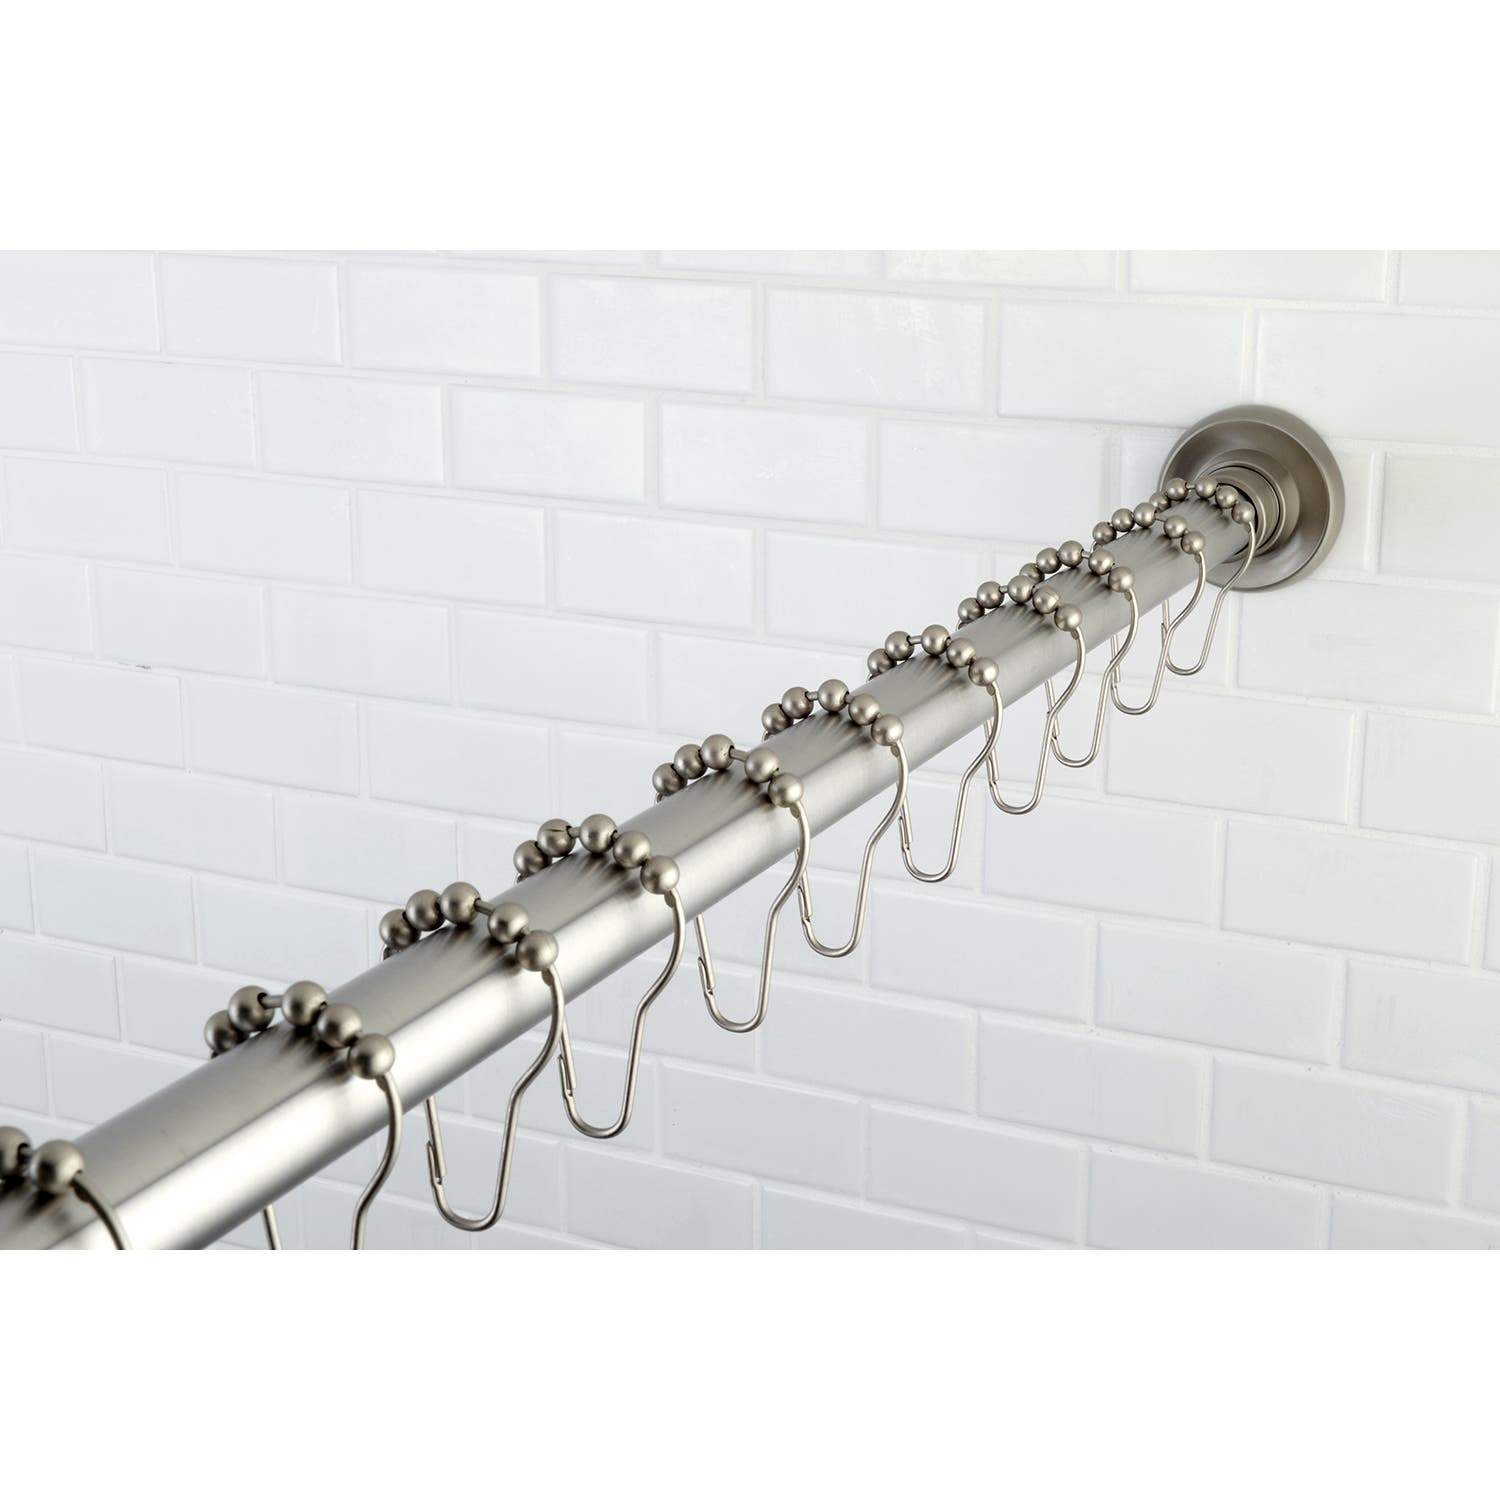 Kingston Brass Edenscape 72-Inch Adjustable Stainless Steel Shower Curtain Rod with Rings